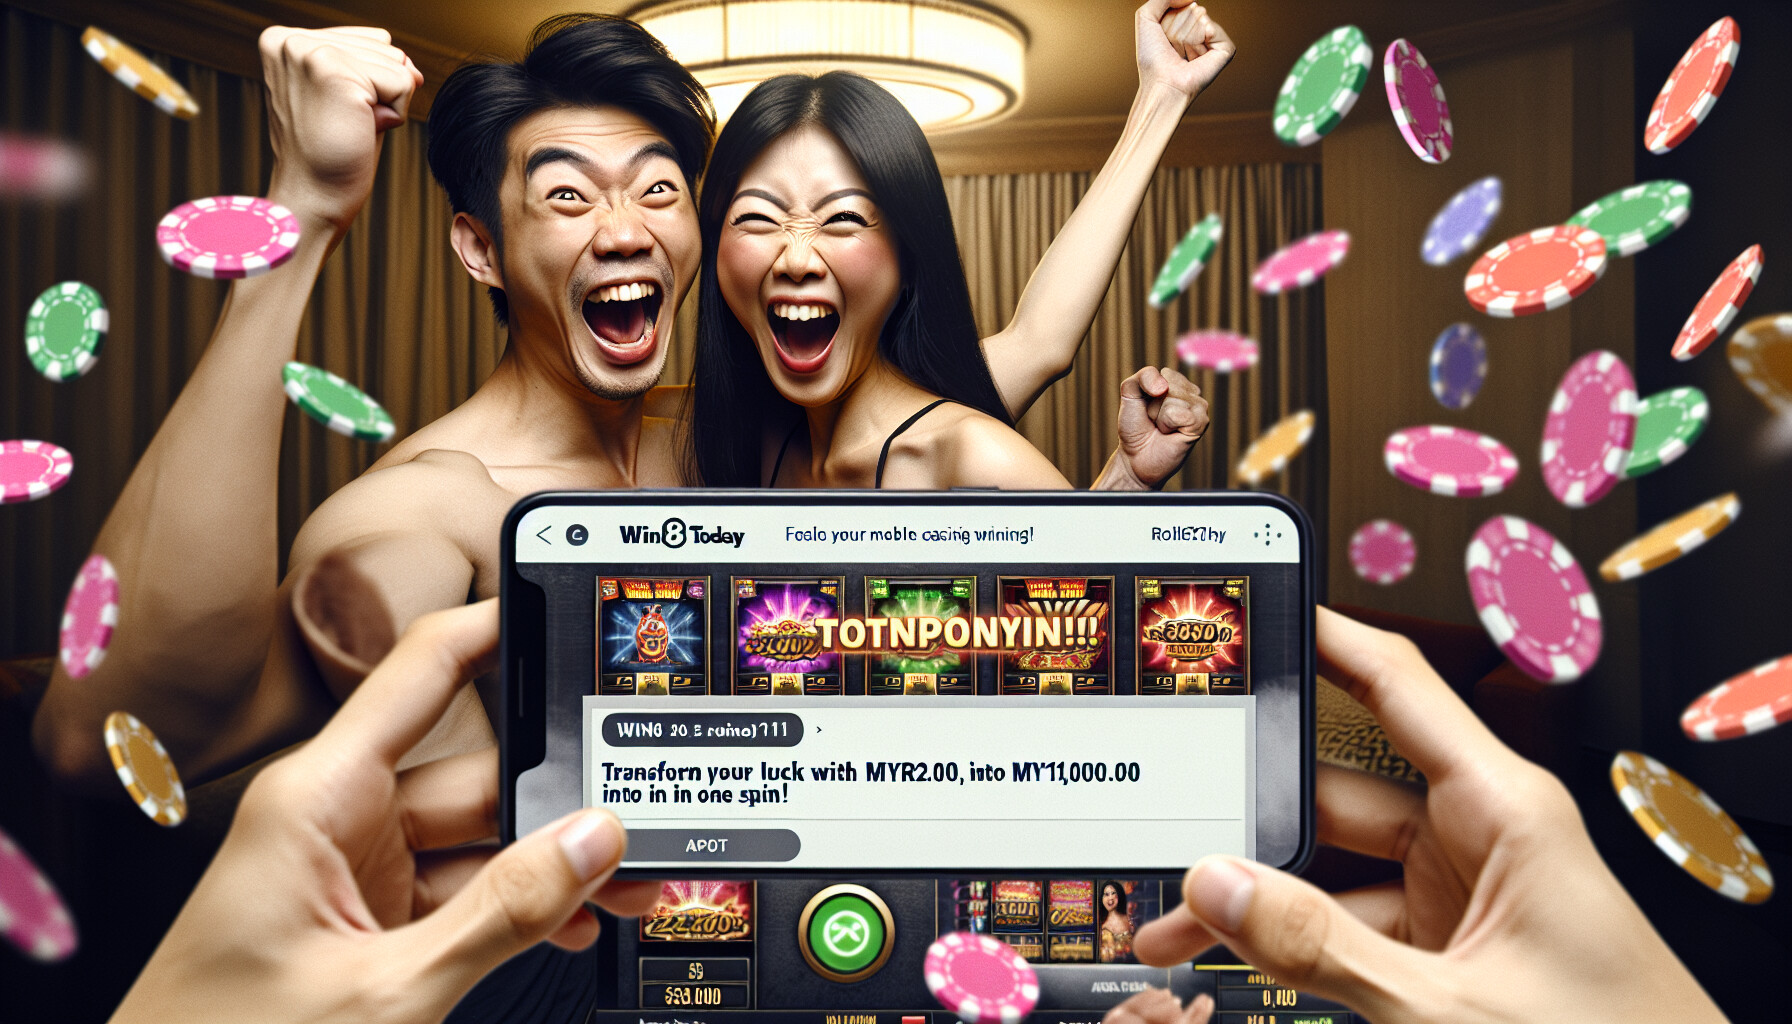 🎰 Turn MYR200 to MYR1,000 with Rollex11! Discover the ultimate winning guide for big wins! 💰 Don't miss out! #Rollex11 #OnlineSlots #WinBig